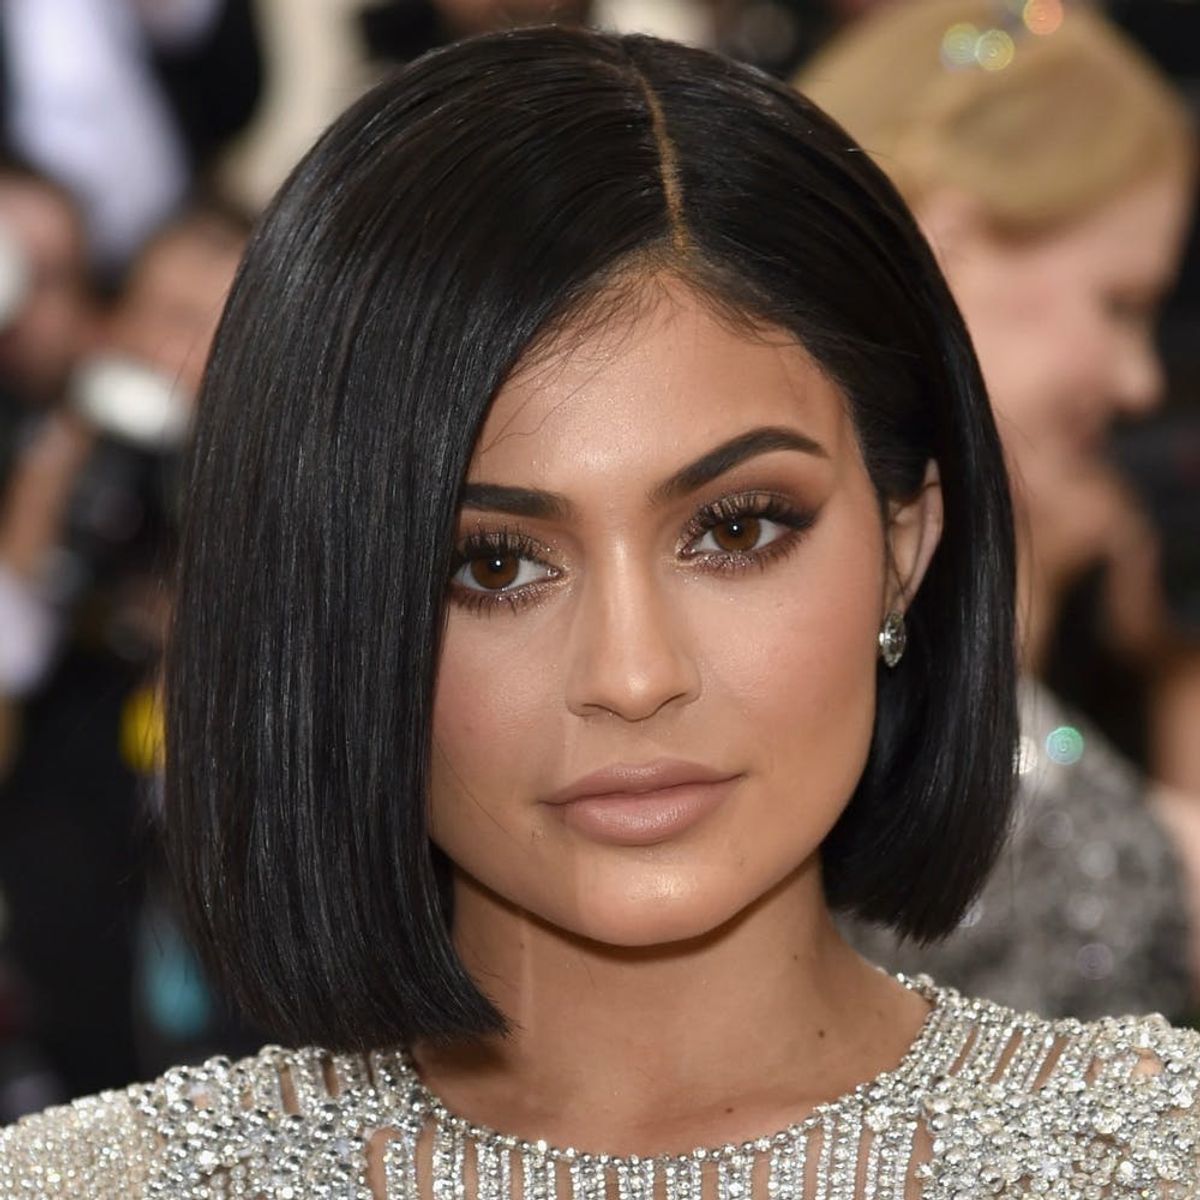 You’ll Never Guess What Kylie Jenner Used As Lipstick Before Lip Kits Were on the Scene